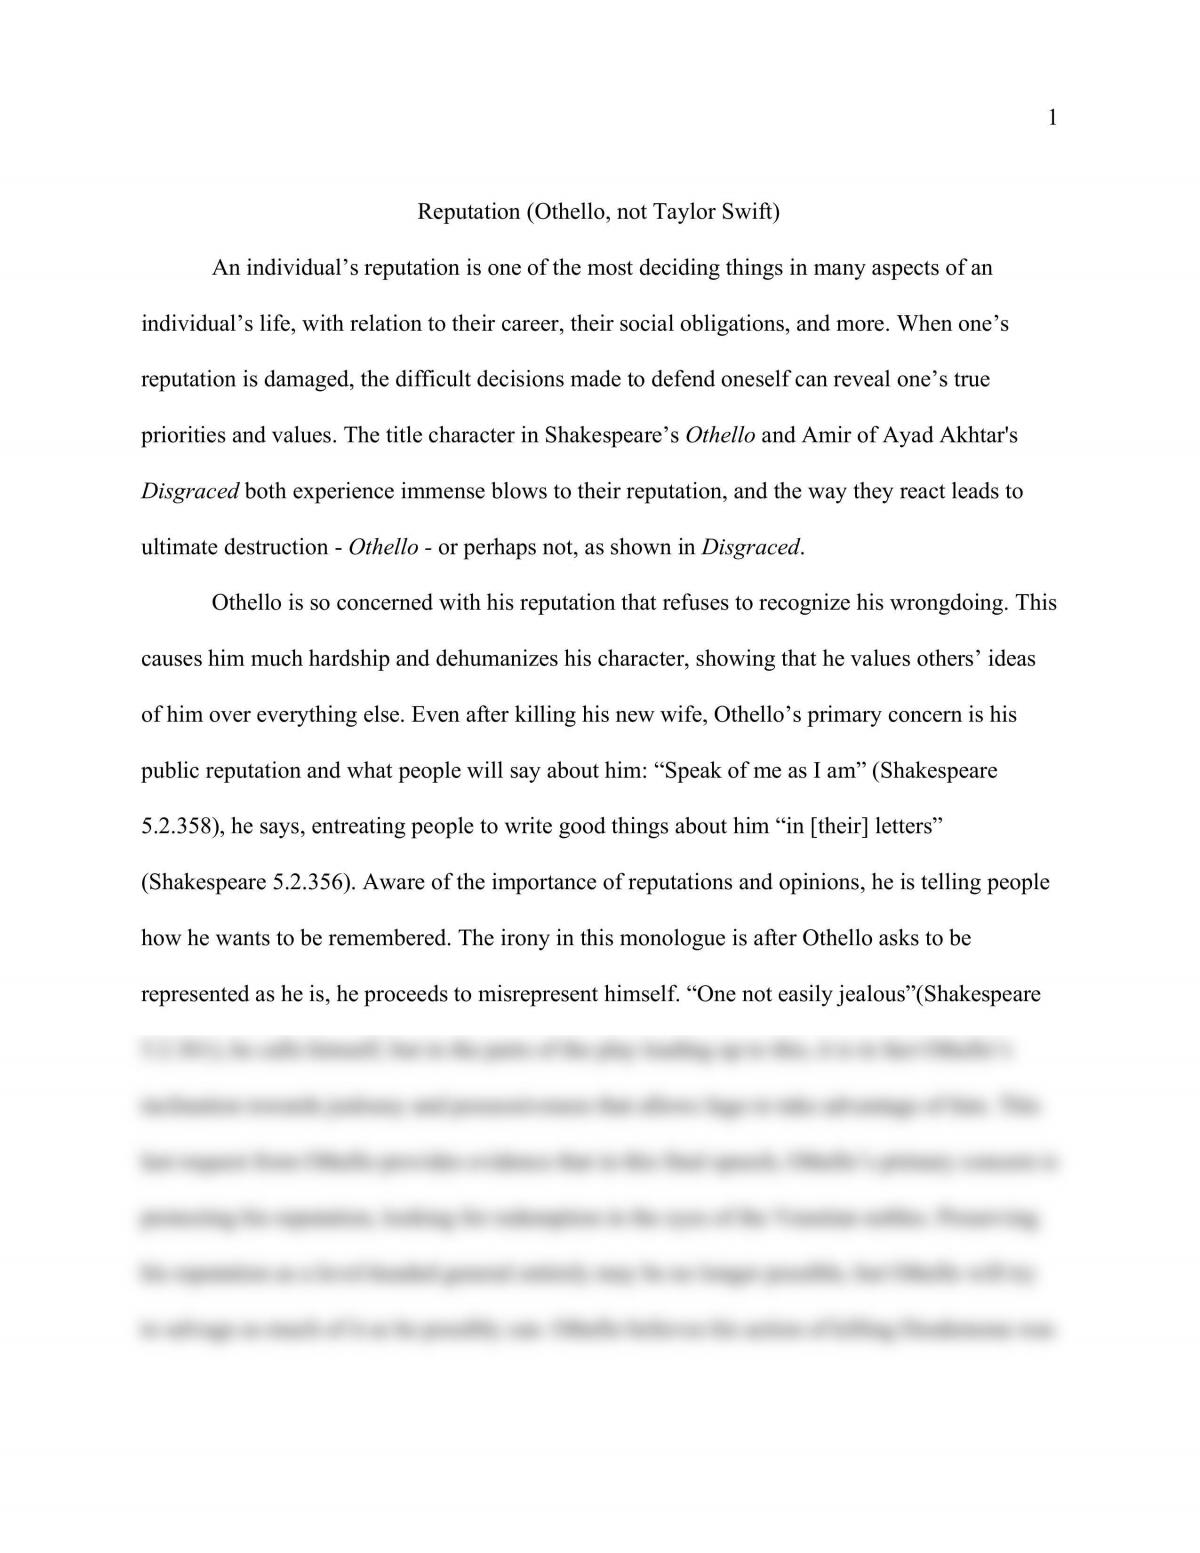 Comparative Essay: Reputation in Othello and Disgraced - Page 1